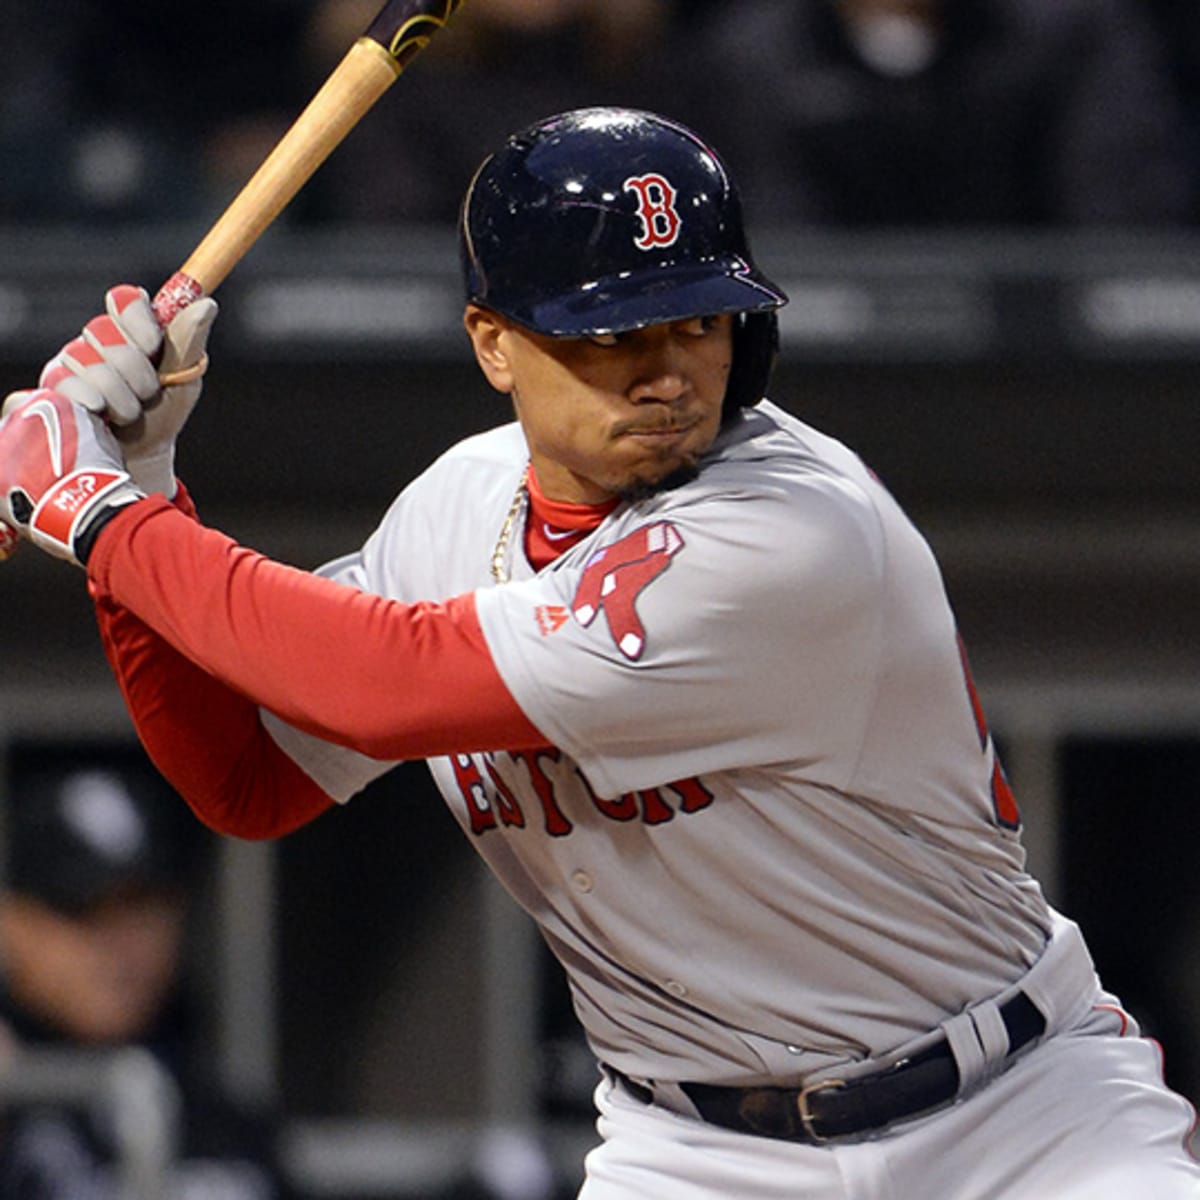 Why Mookie Betts should be the face of Major League Baseball